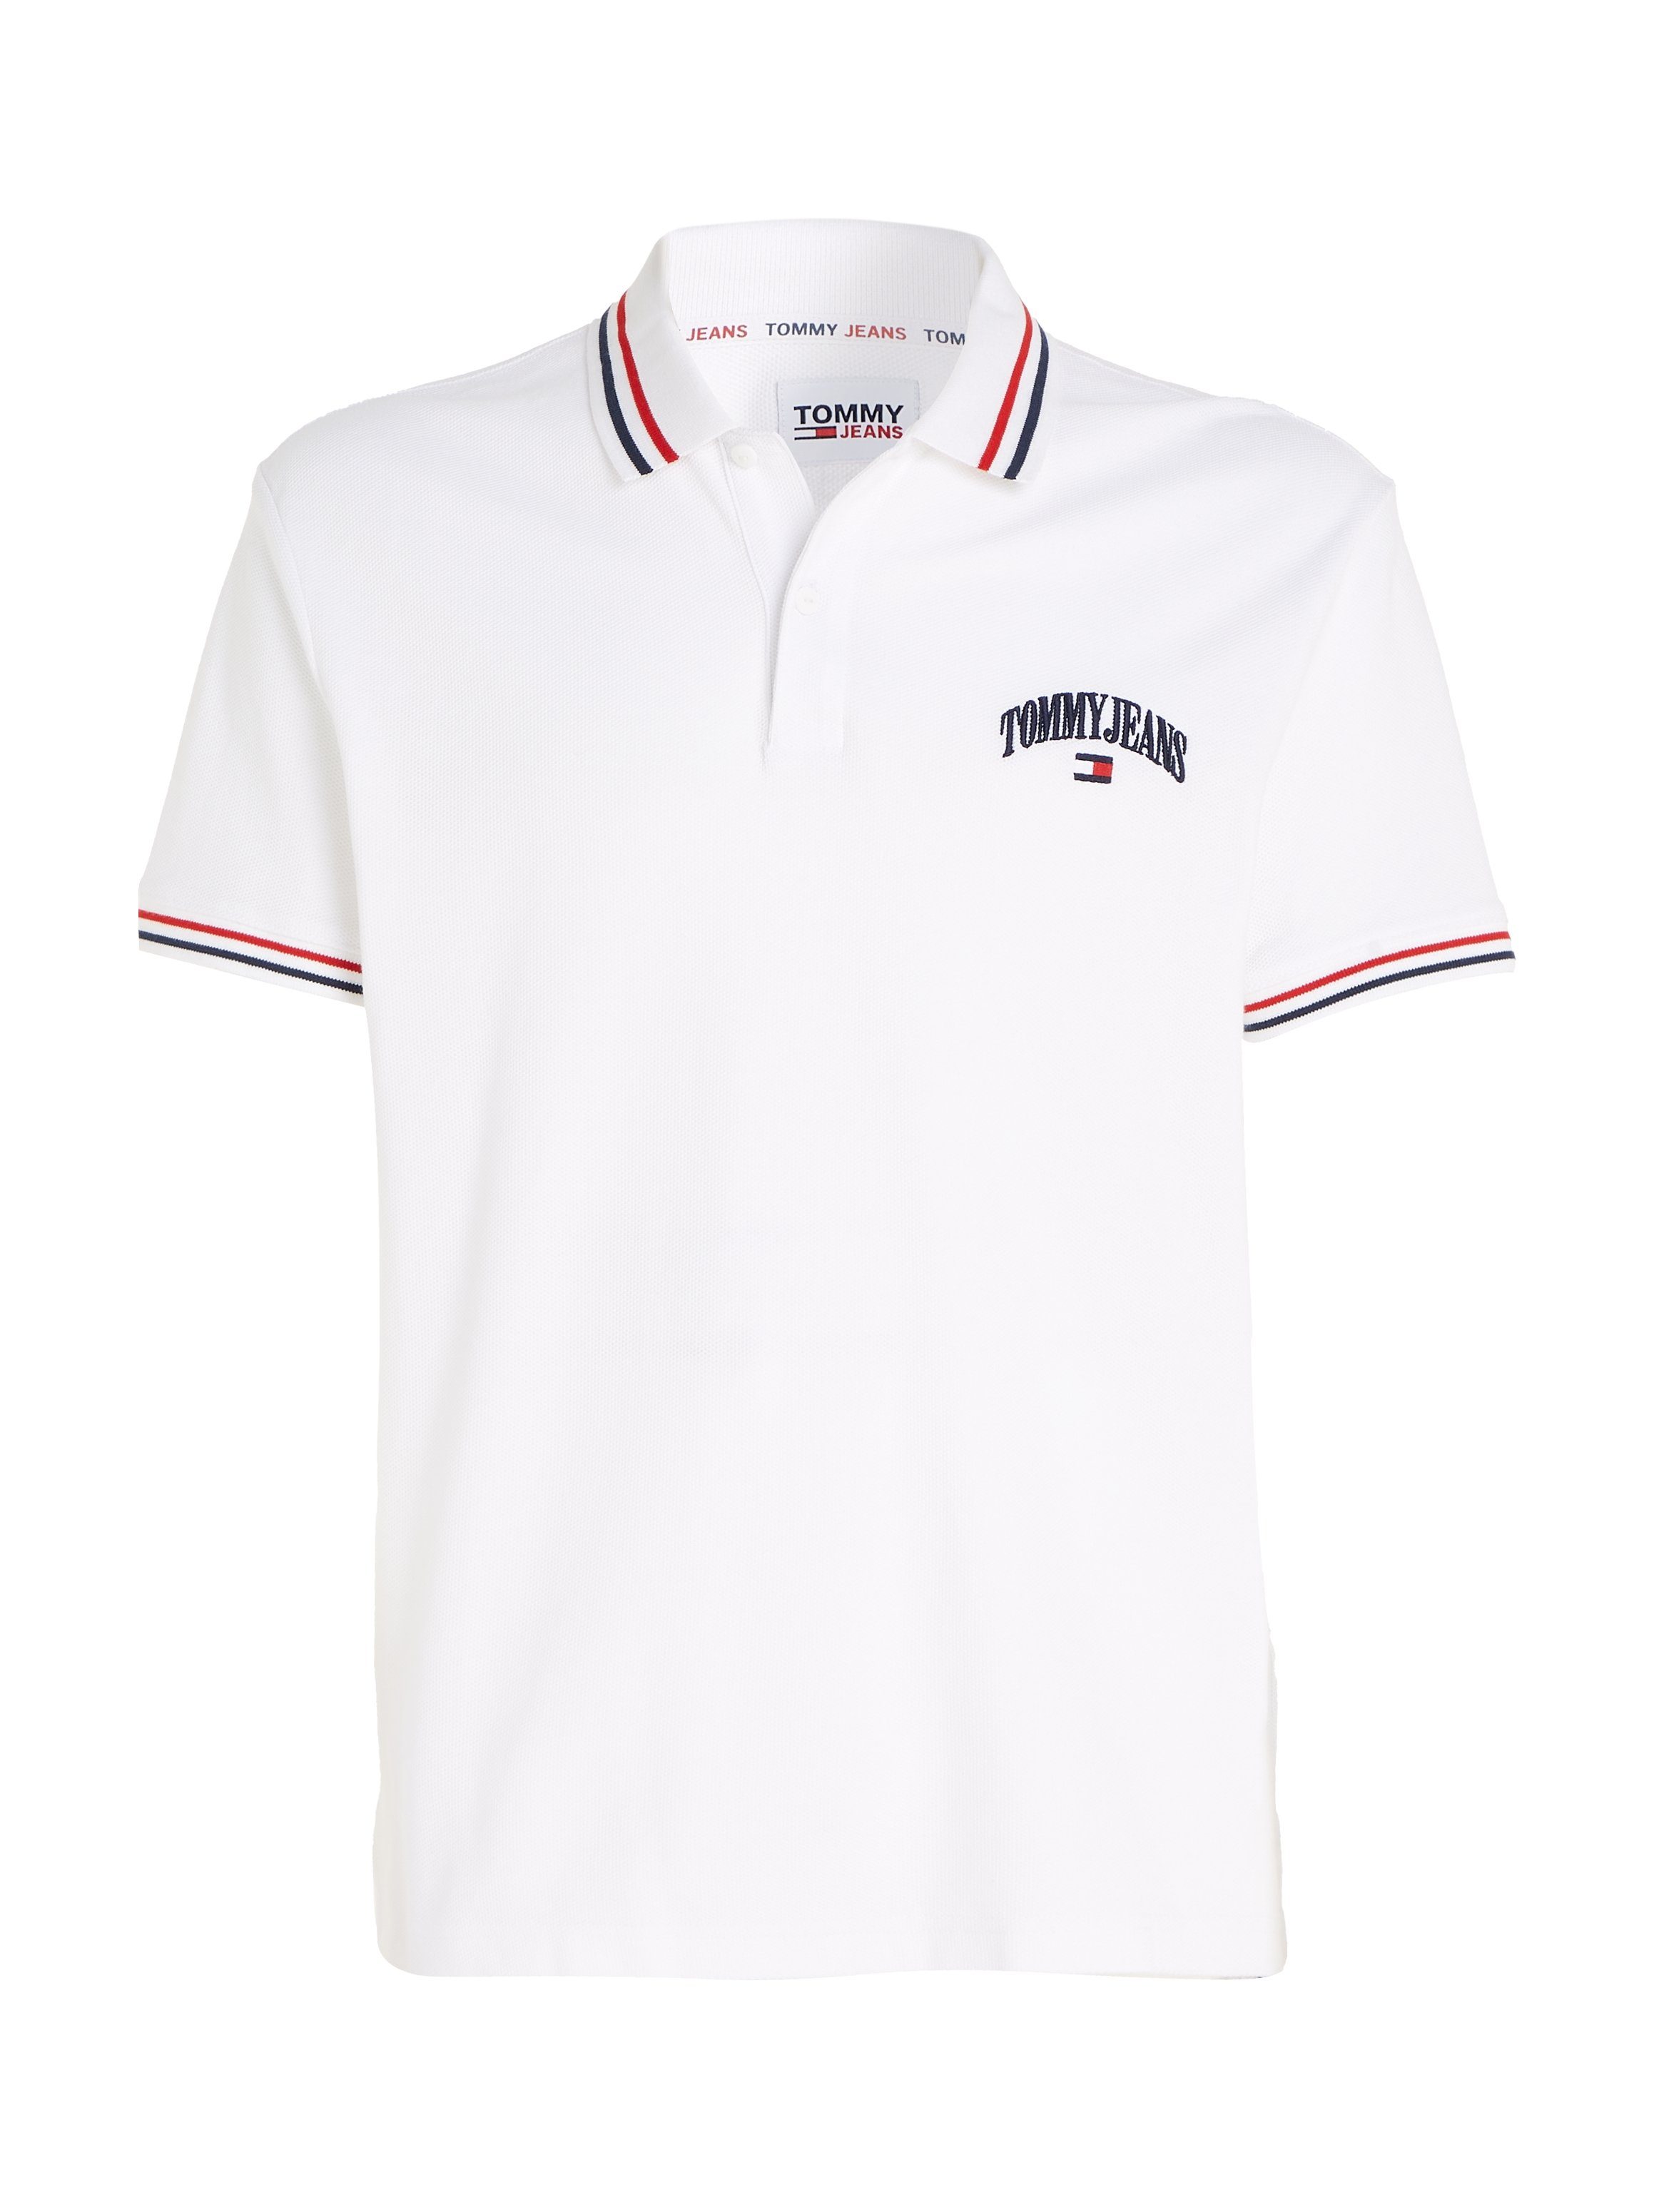 TJM POLO Jeans Tommy TIPPED GRAPHIC CLSC Poloshirt White